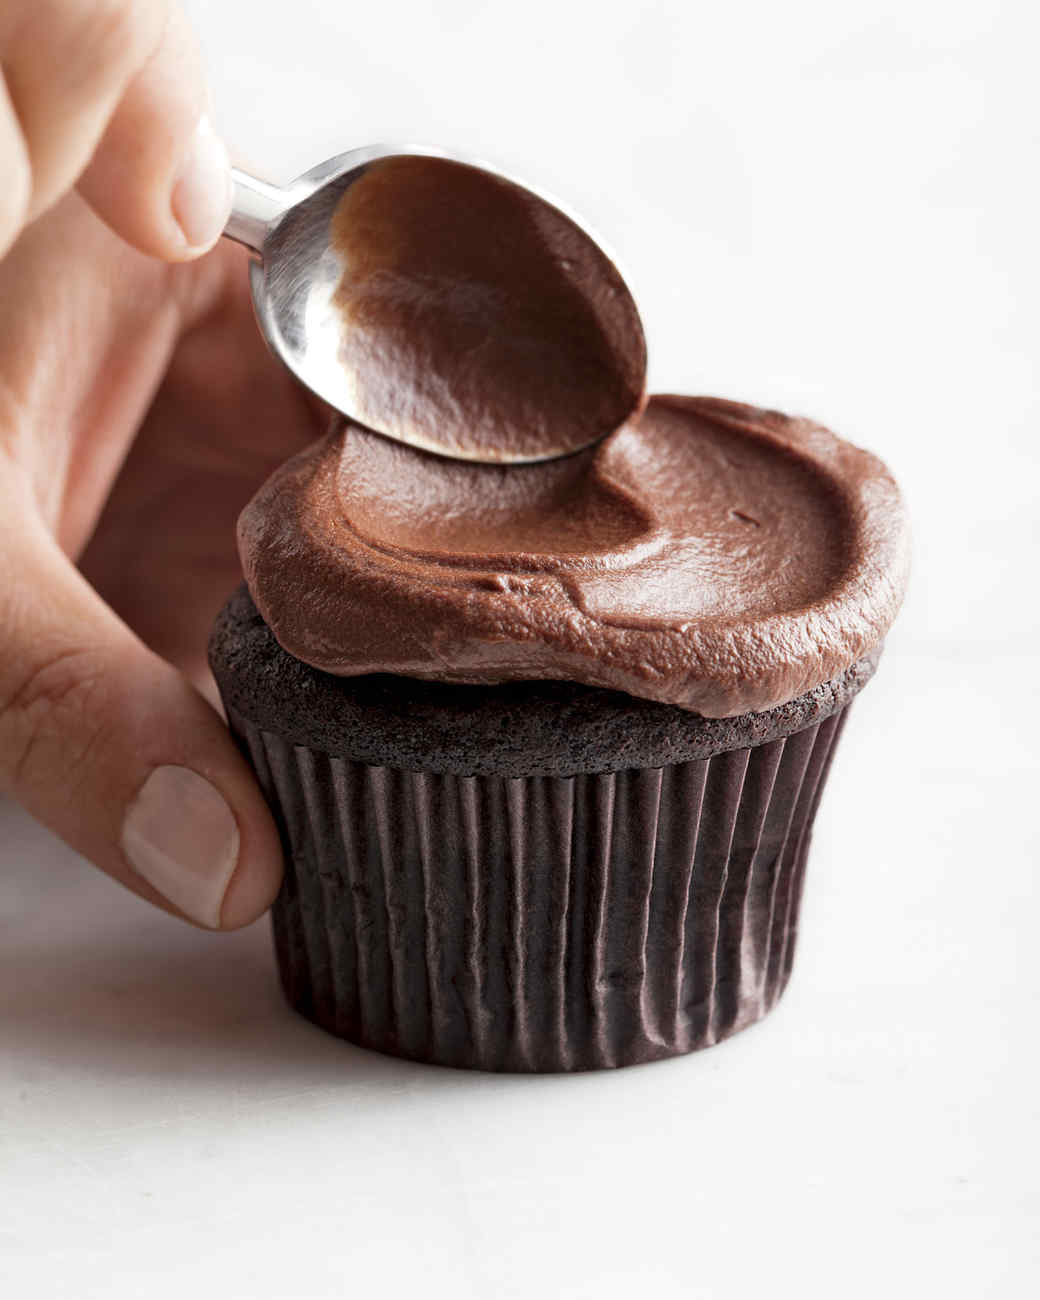 Chocolate Cupcakes with Whipped Ganache Frosting Recipe | Martha Stewart